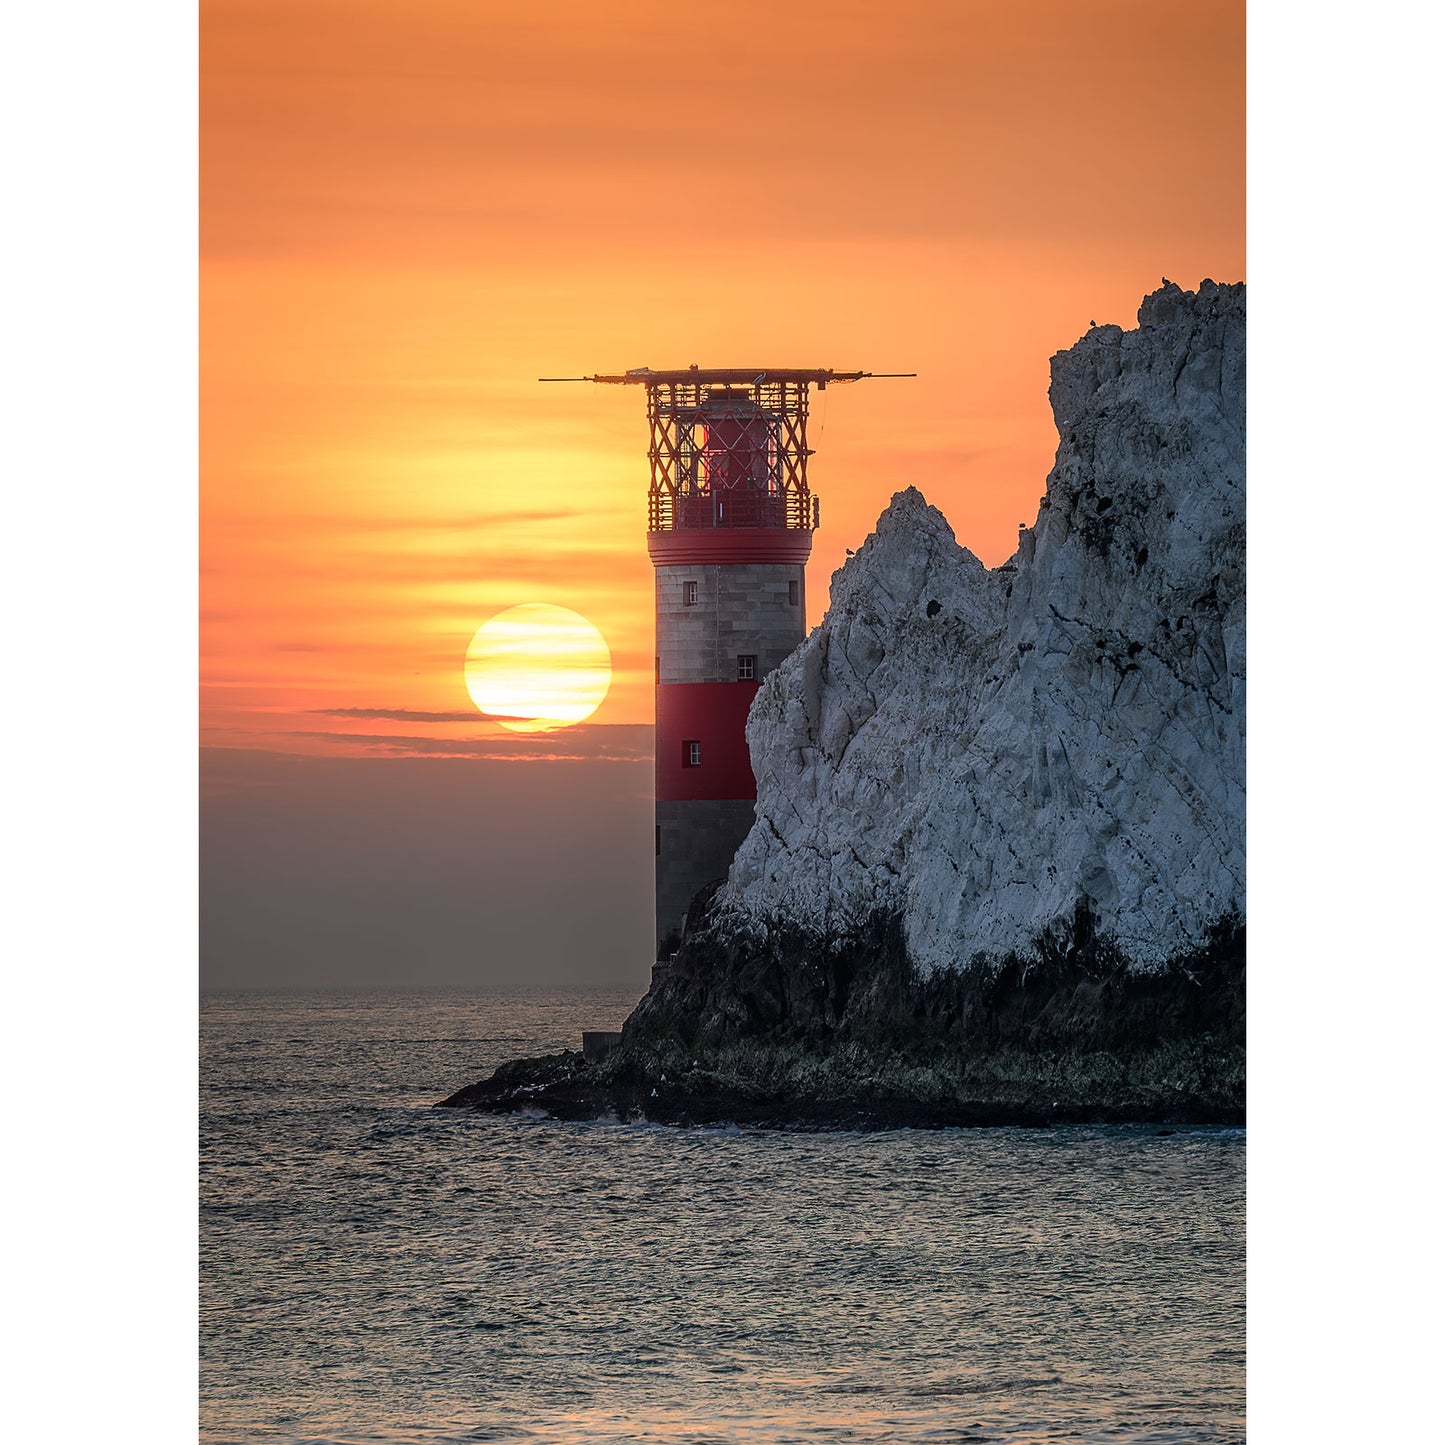 Sunset over The Needles setting behind a lighthouse on the Isle of Wight's rocky outcrop at sea, captured by Available Light Photography.